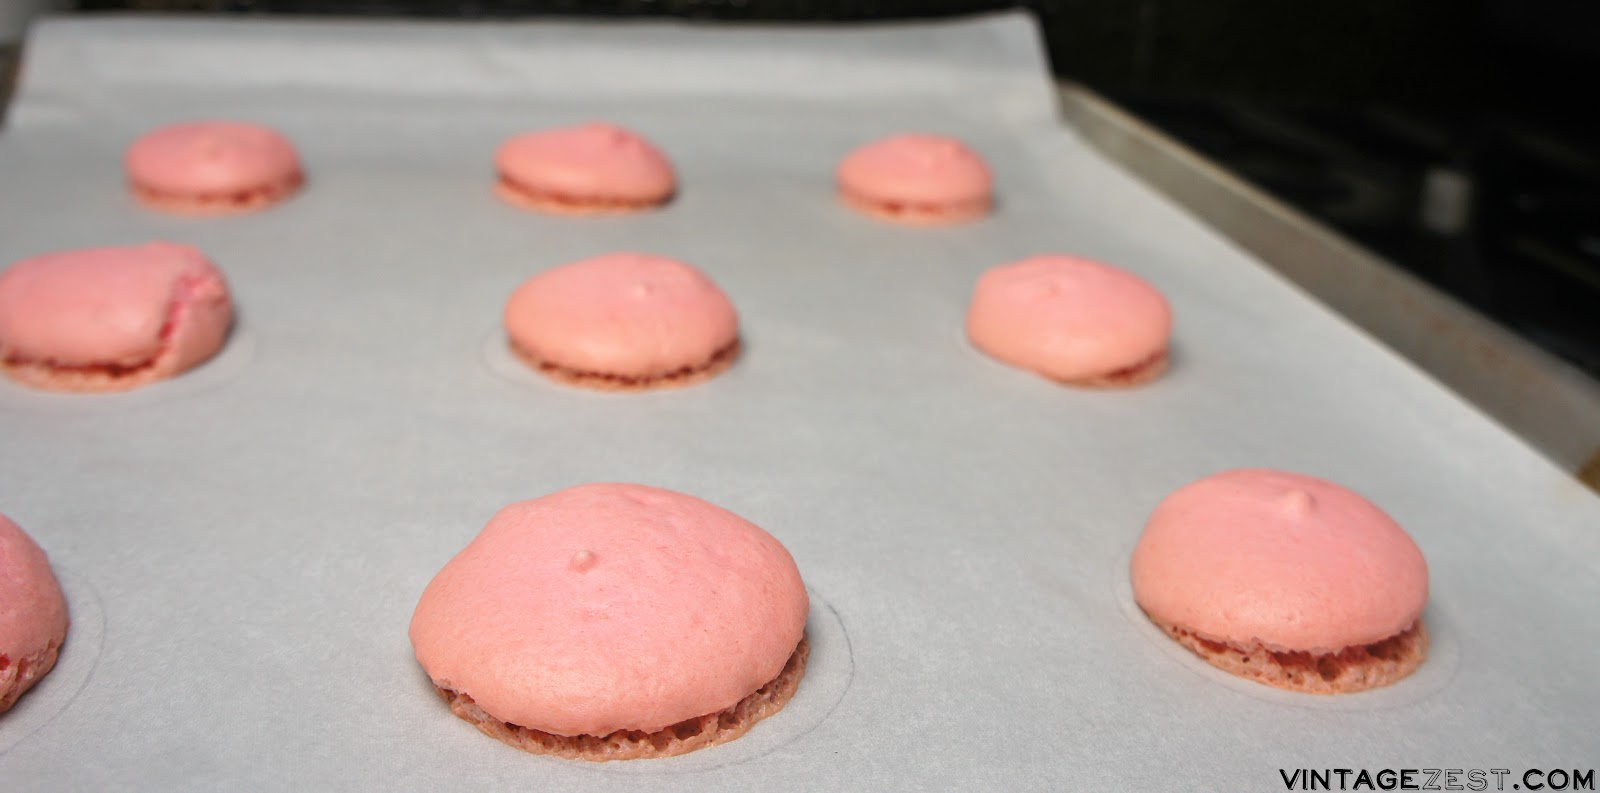 Peppermint Mocha French Macarons recipe on Diane's Vintage Zest  #ad #DelightfulMoments #CollectiveBias